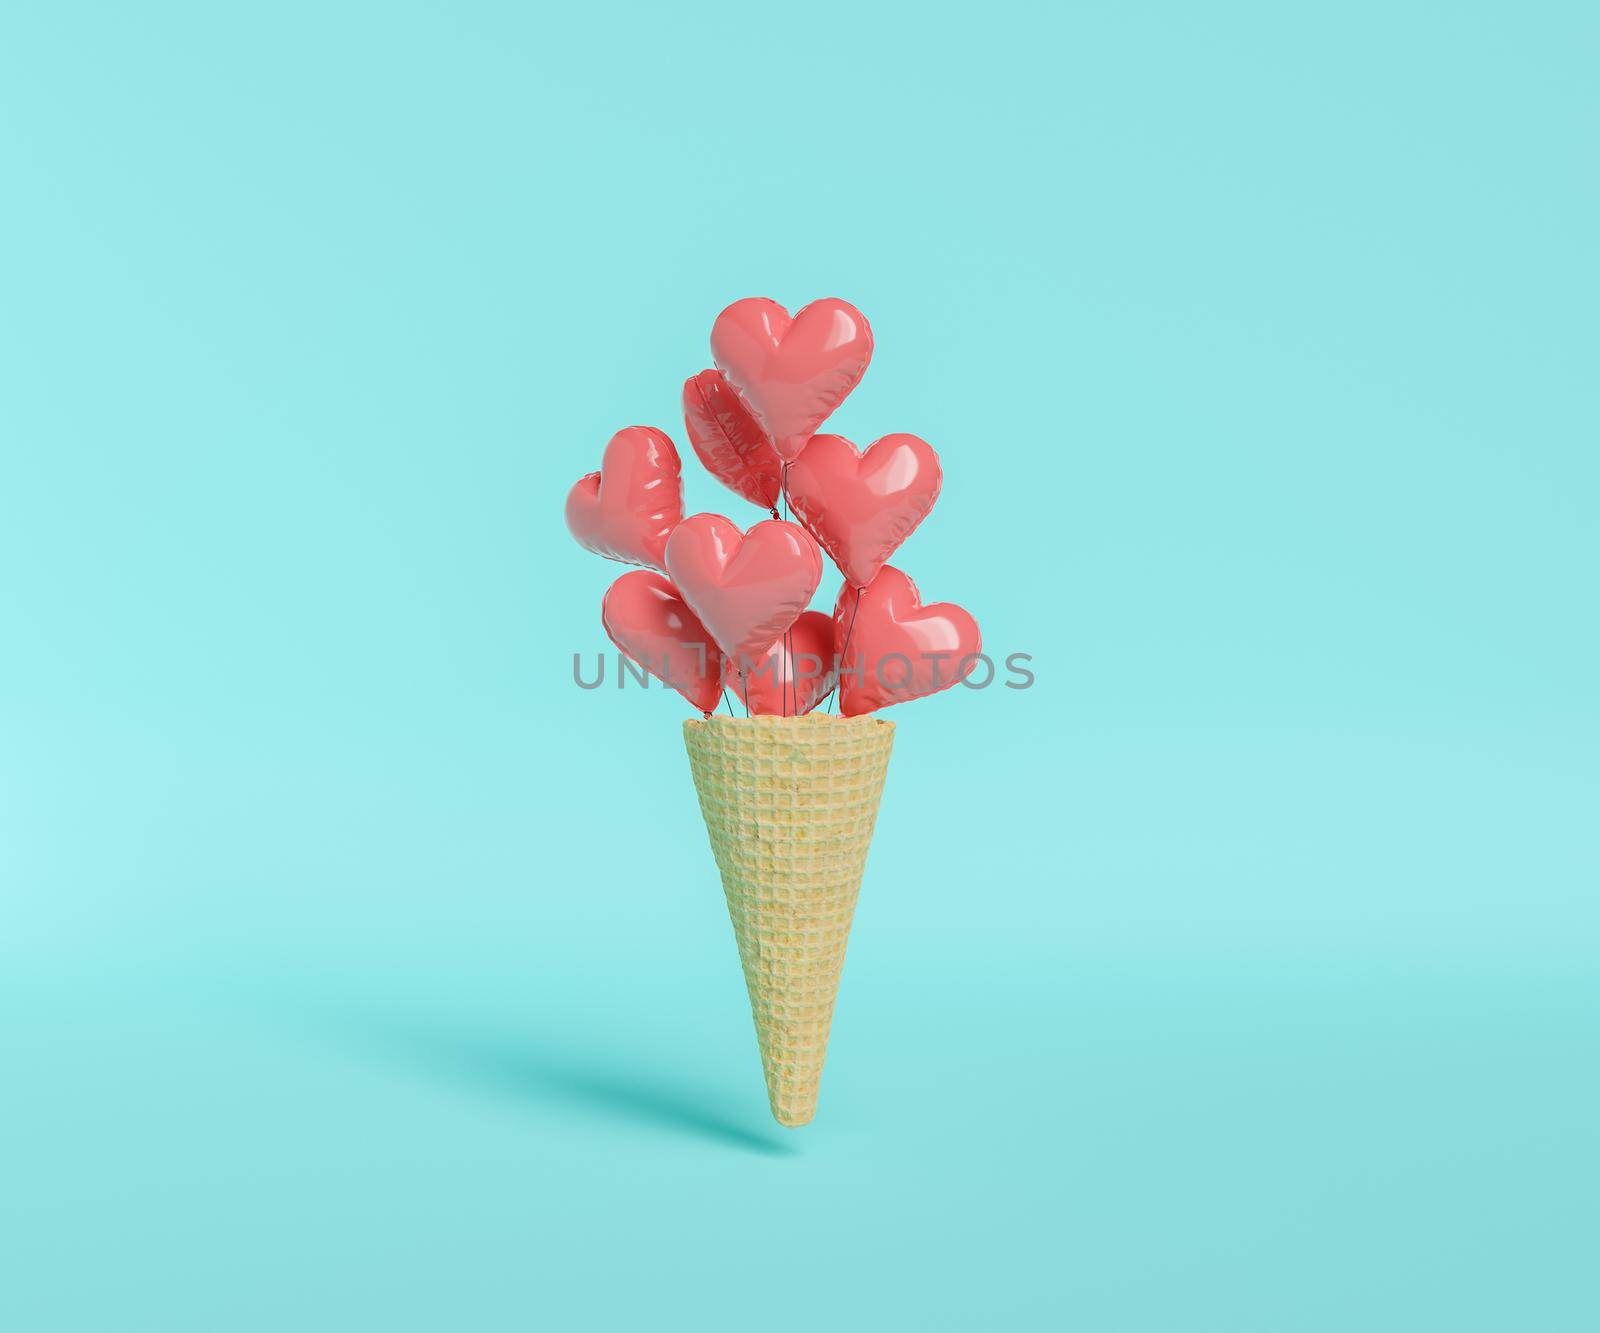 ice cream cone with heart balloons coming out of it by asolano